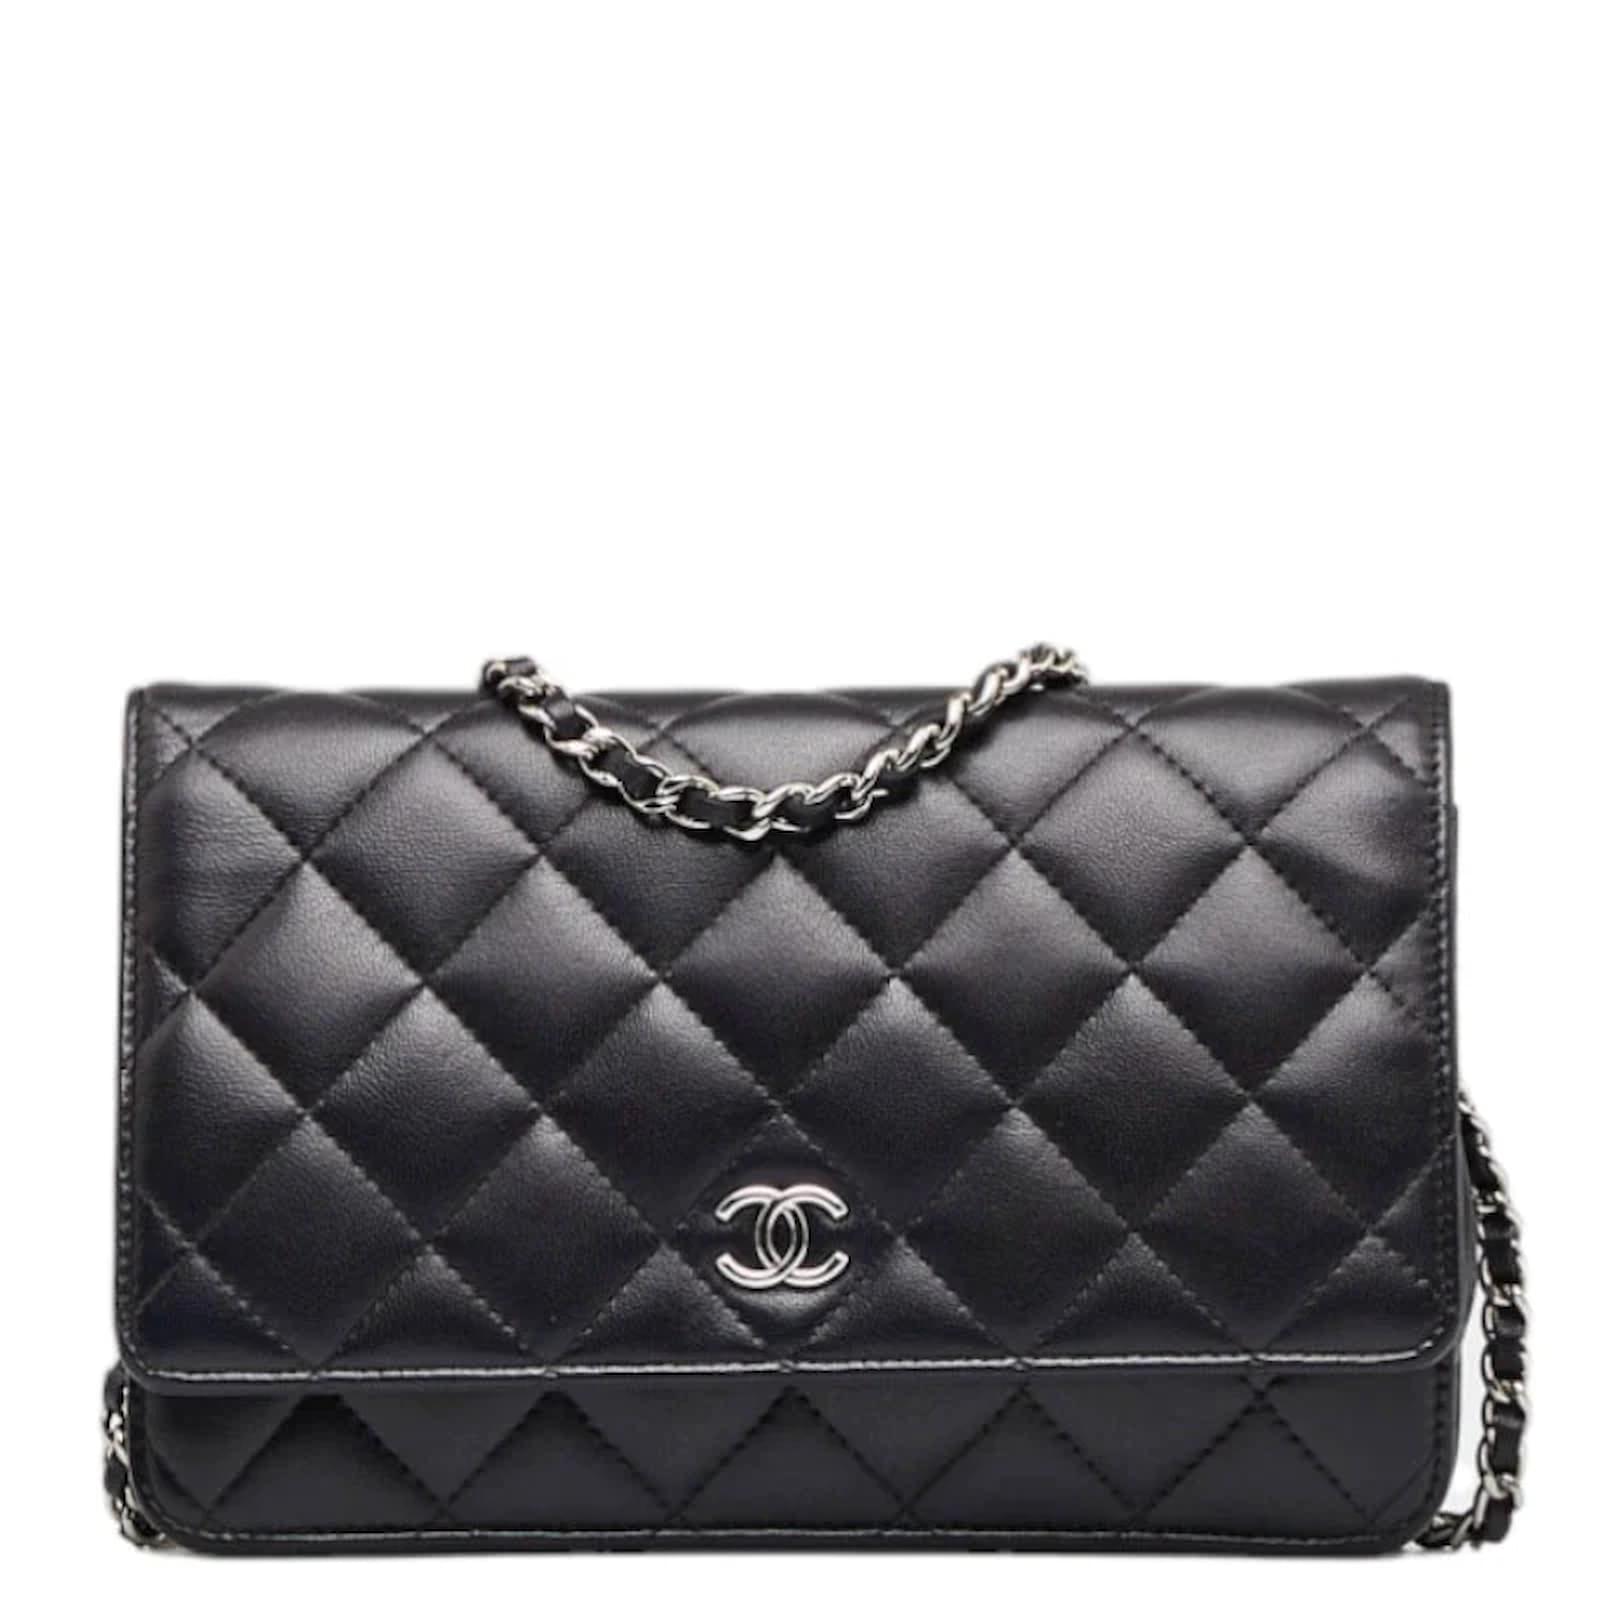 Chanel CC Quilted Leather Single Flap Bag